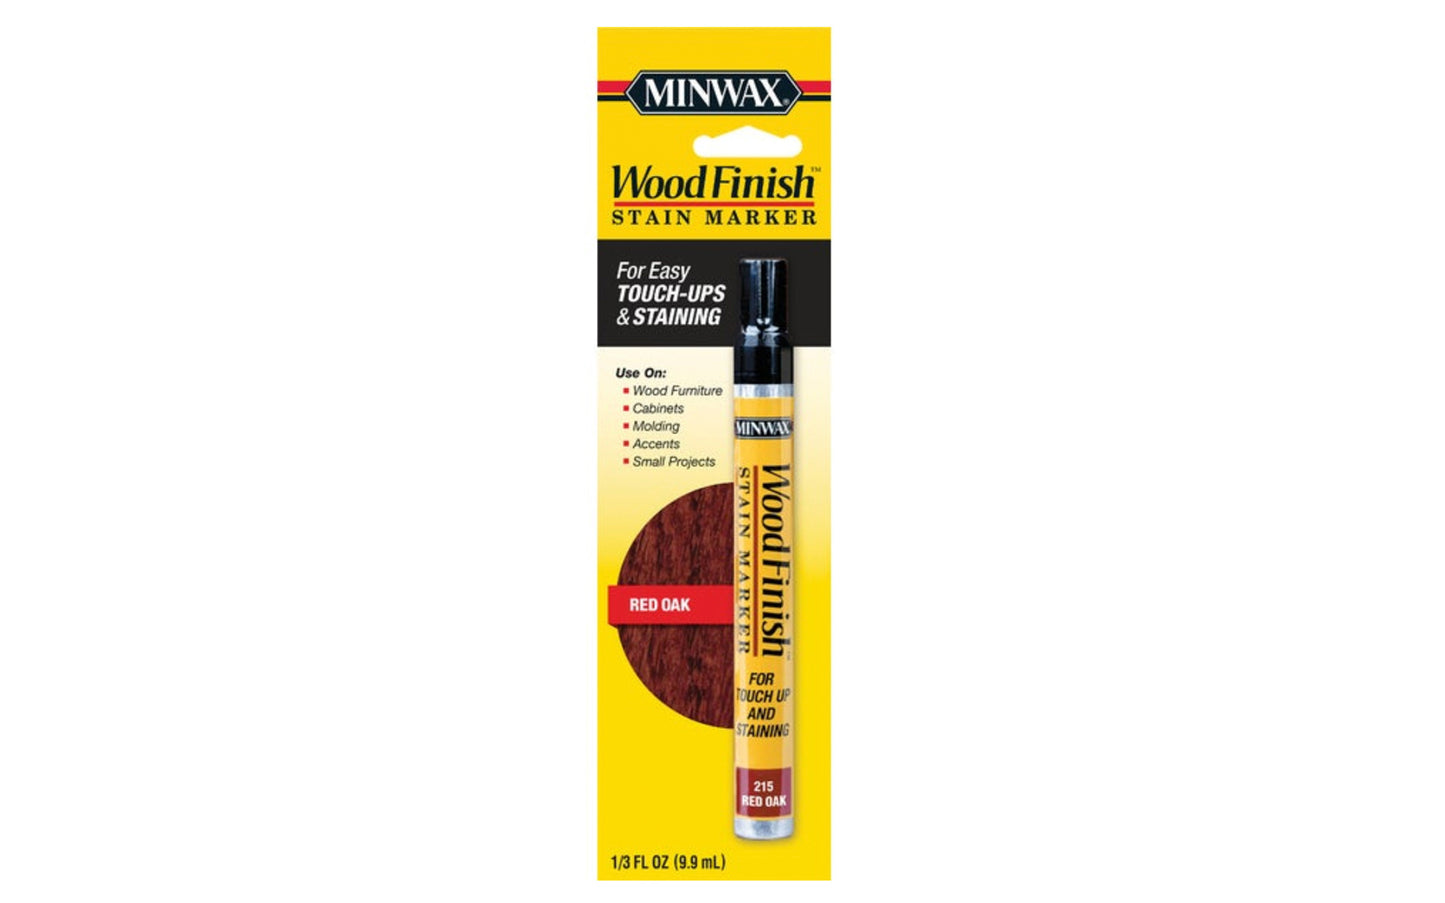 Minwax Stain Marker - Red Oak. For use on furniture, cabinets, wood molding, accents, small projects, other finished wood surfaces. Quick & easy touch-ups & staining. Minwax touch up stain pen. Touch-up stain marker.